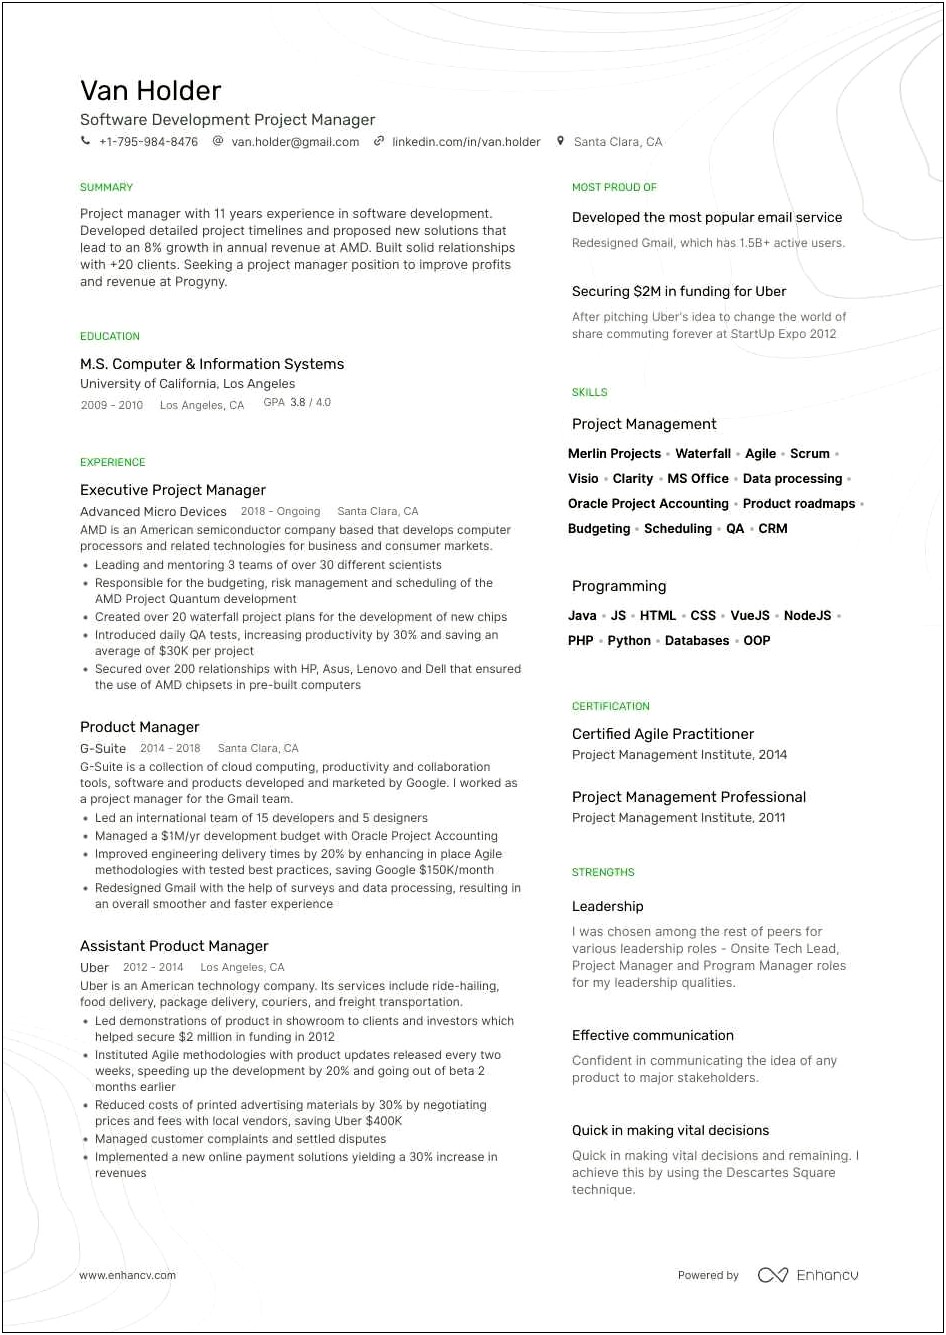 Experienced Project Manager Resume Sample